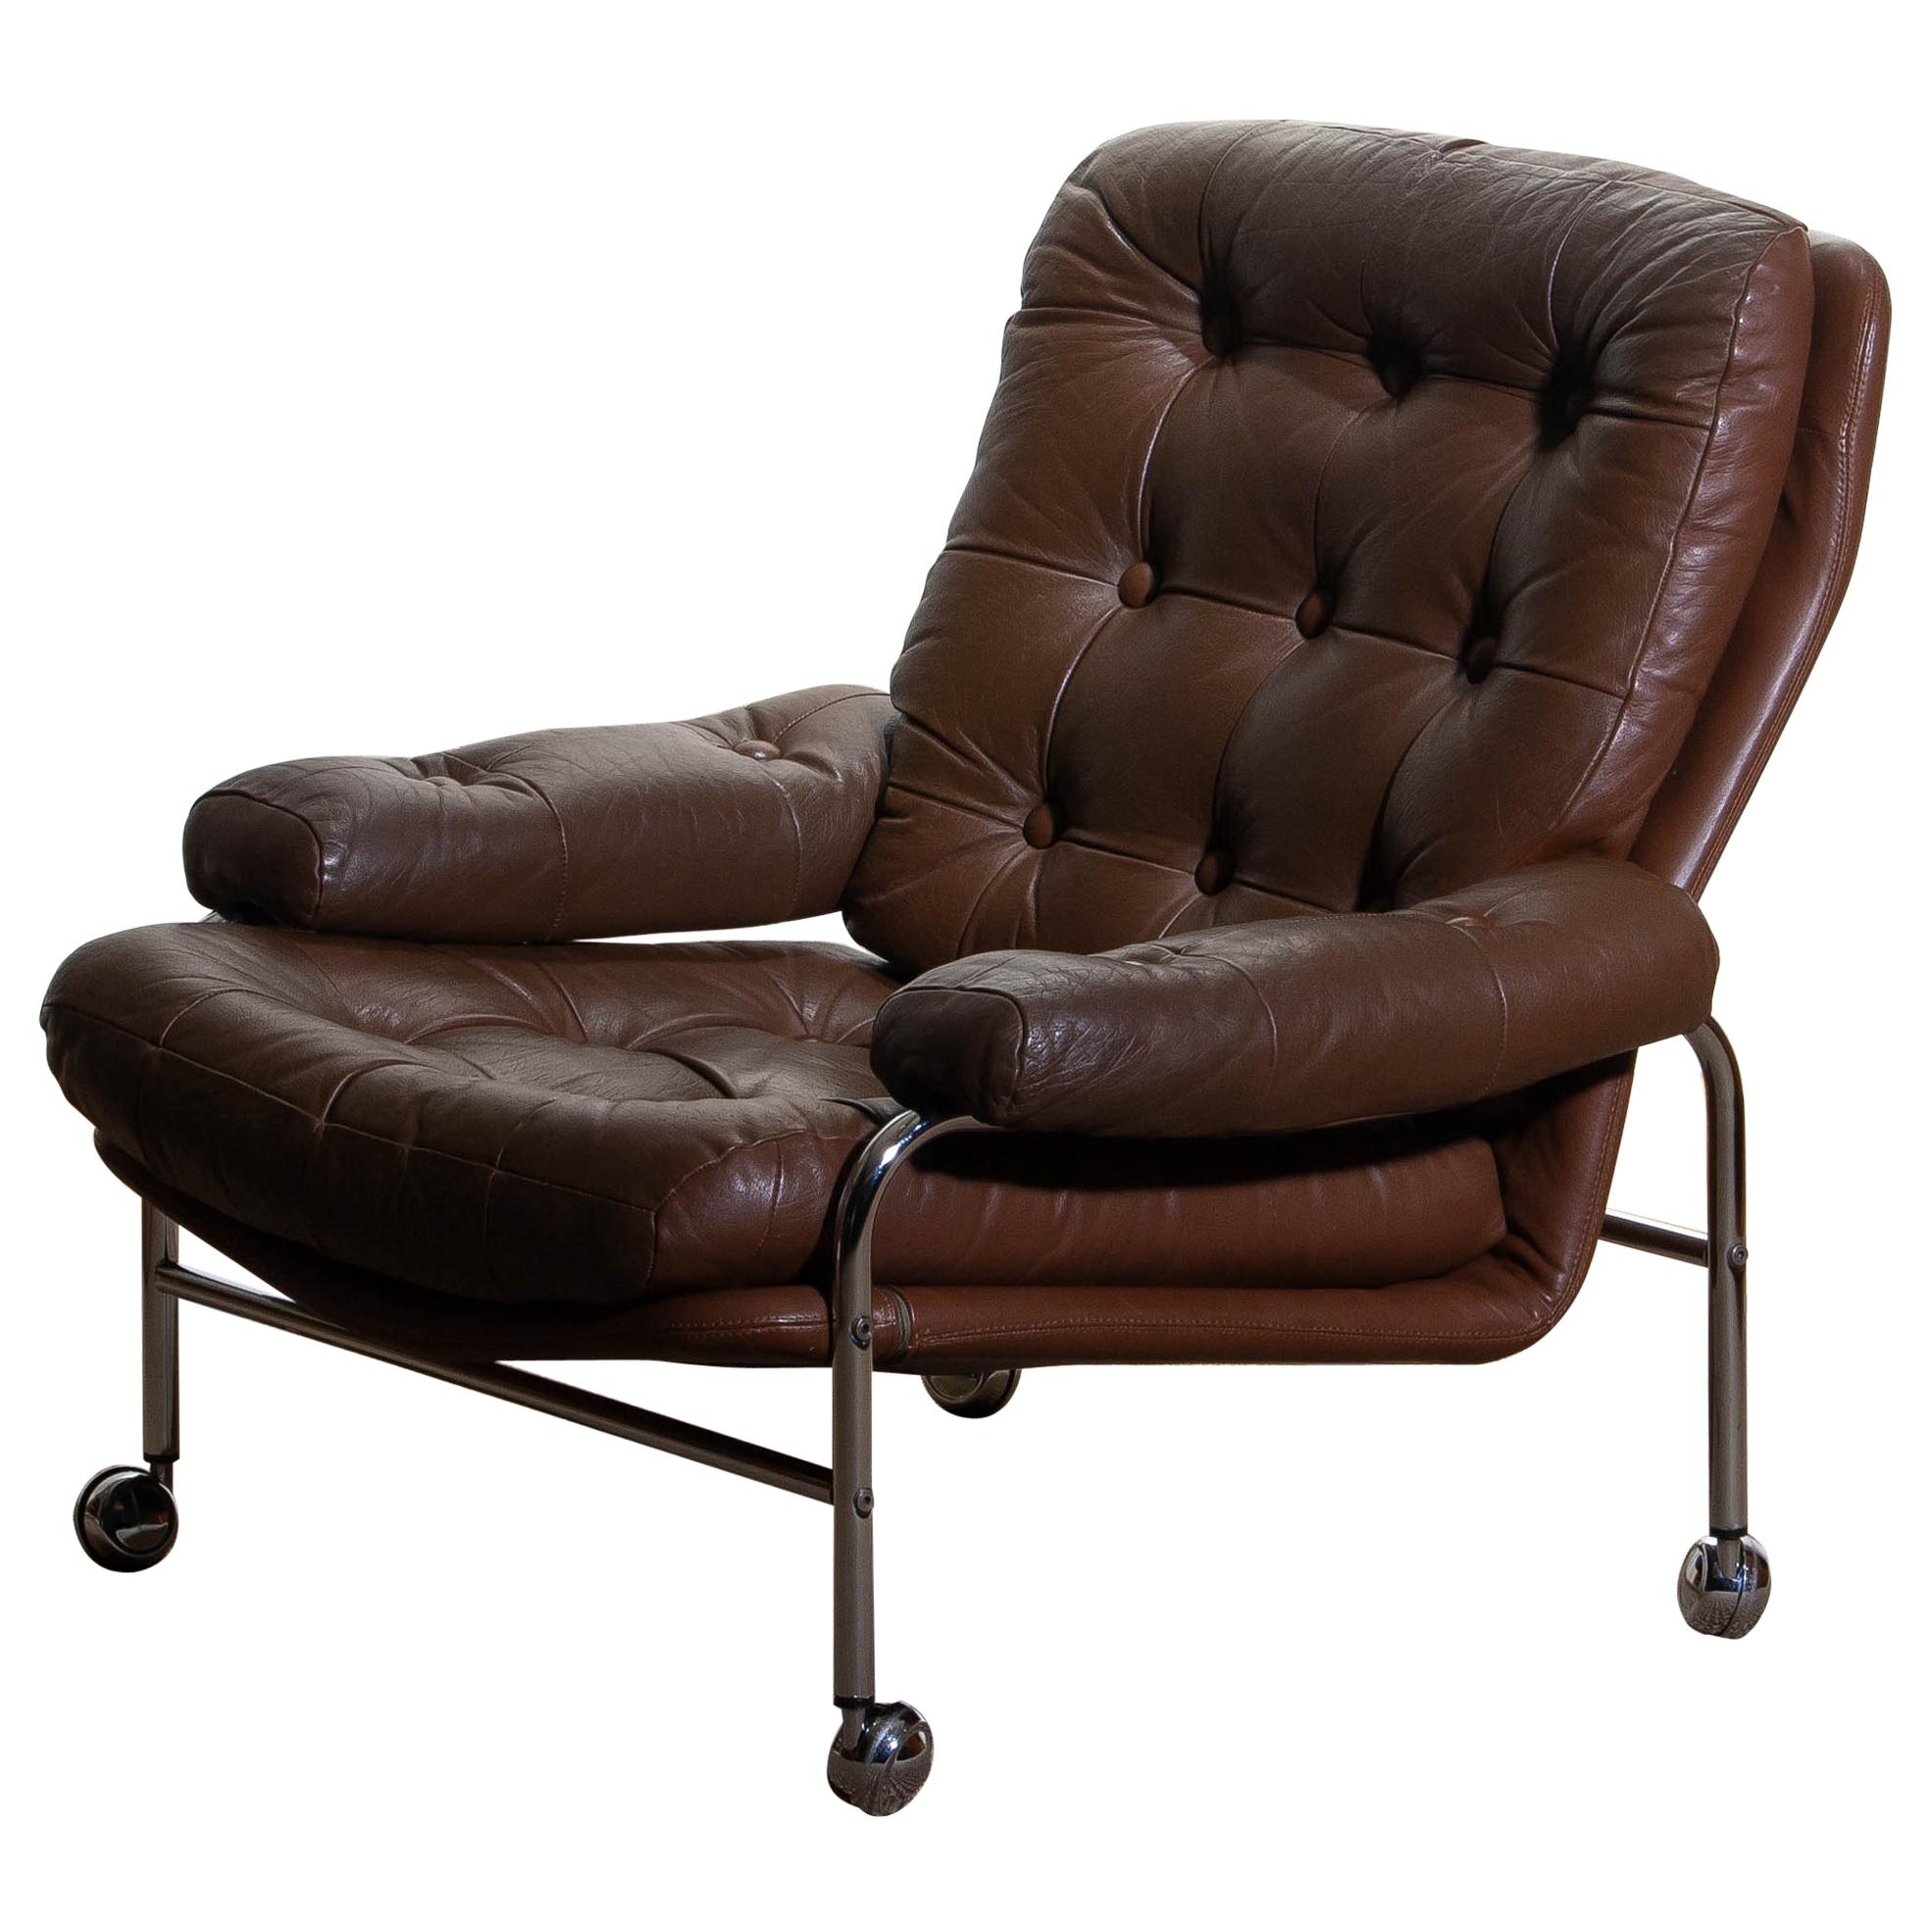 1970s, Chrome and Brown Leather Easy / Lounge Chair by Scapa Rydaholm, Sweden